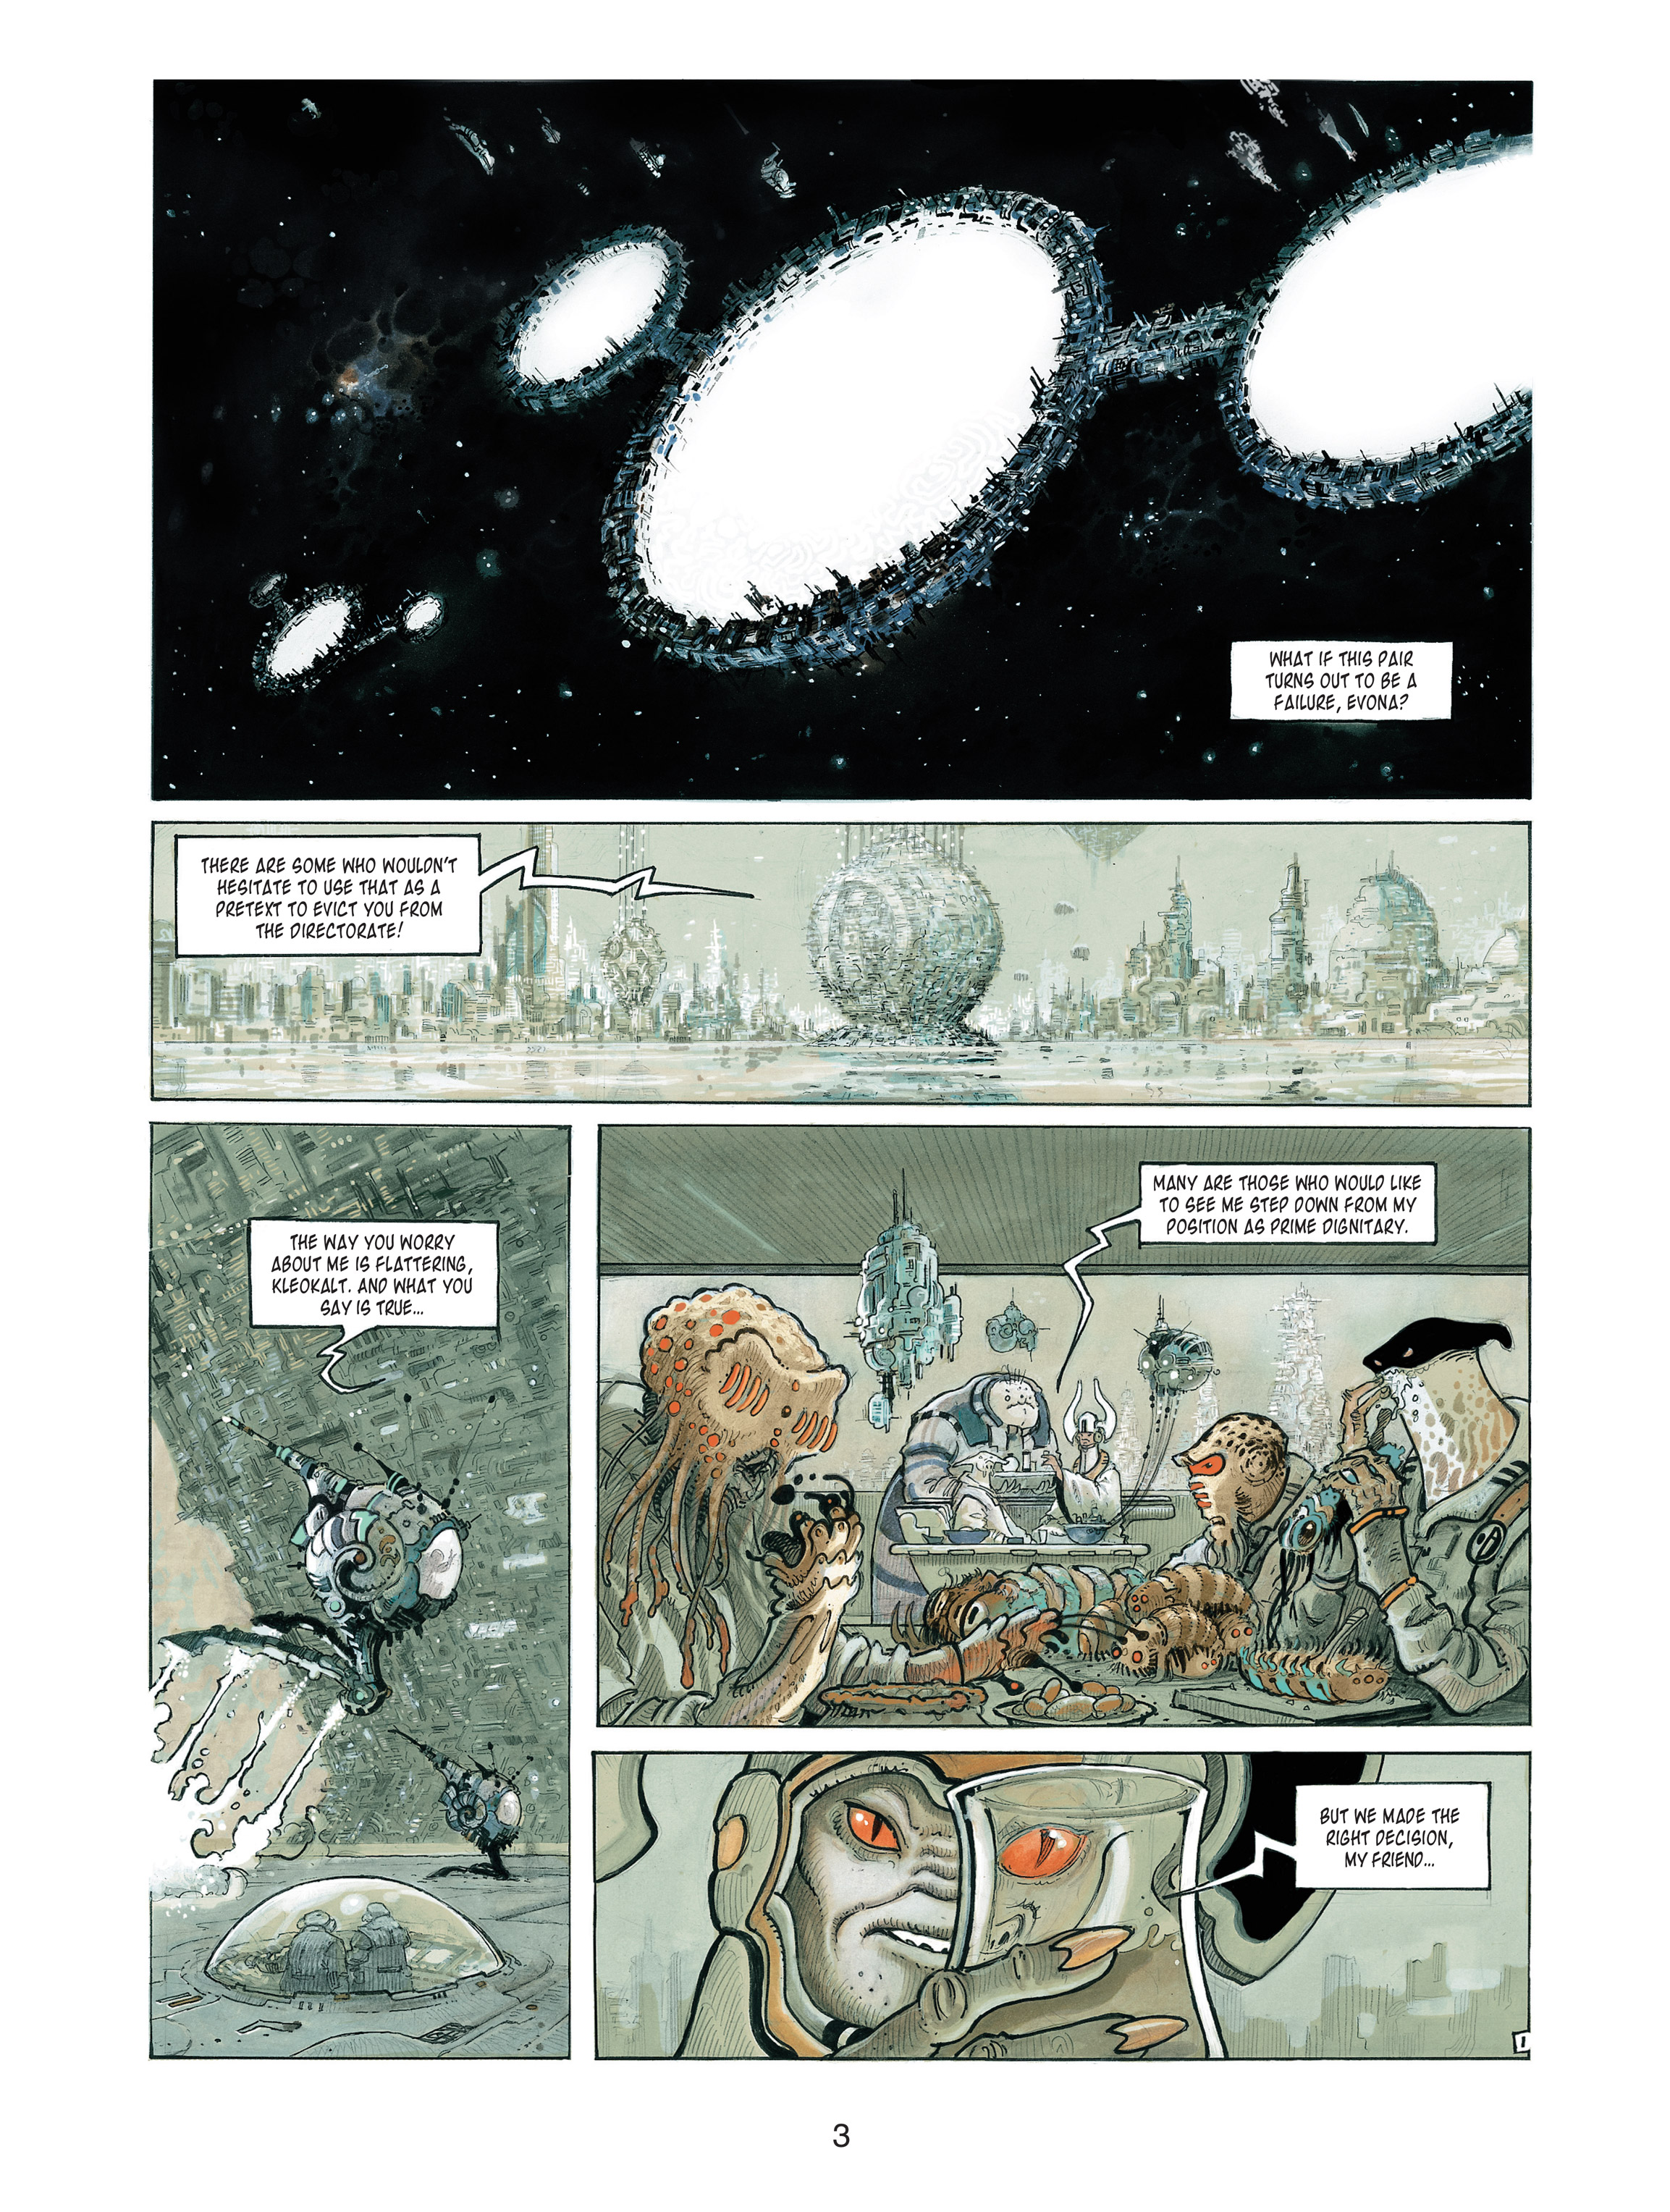 Orbital (2009-): Chapter 2 - Page 4